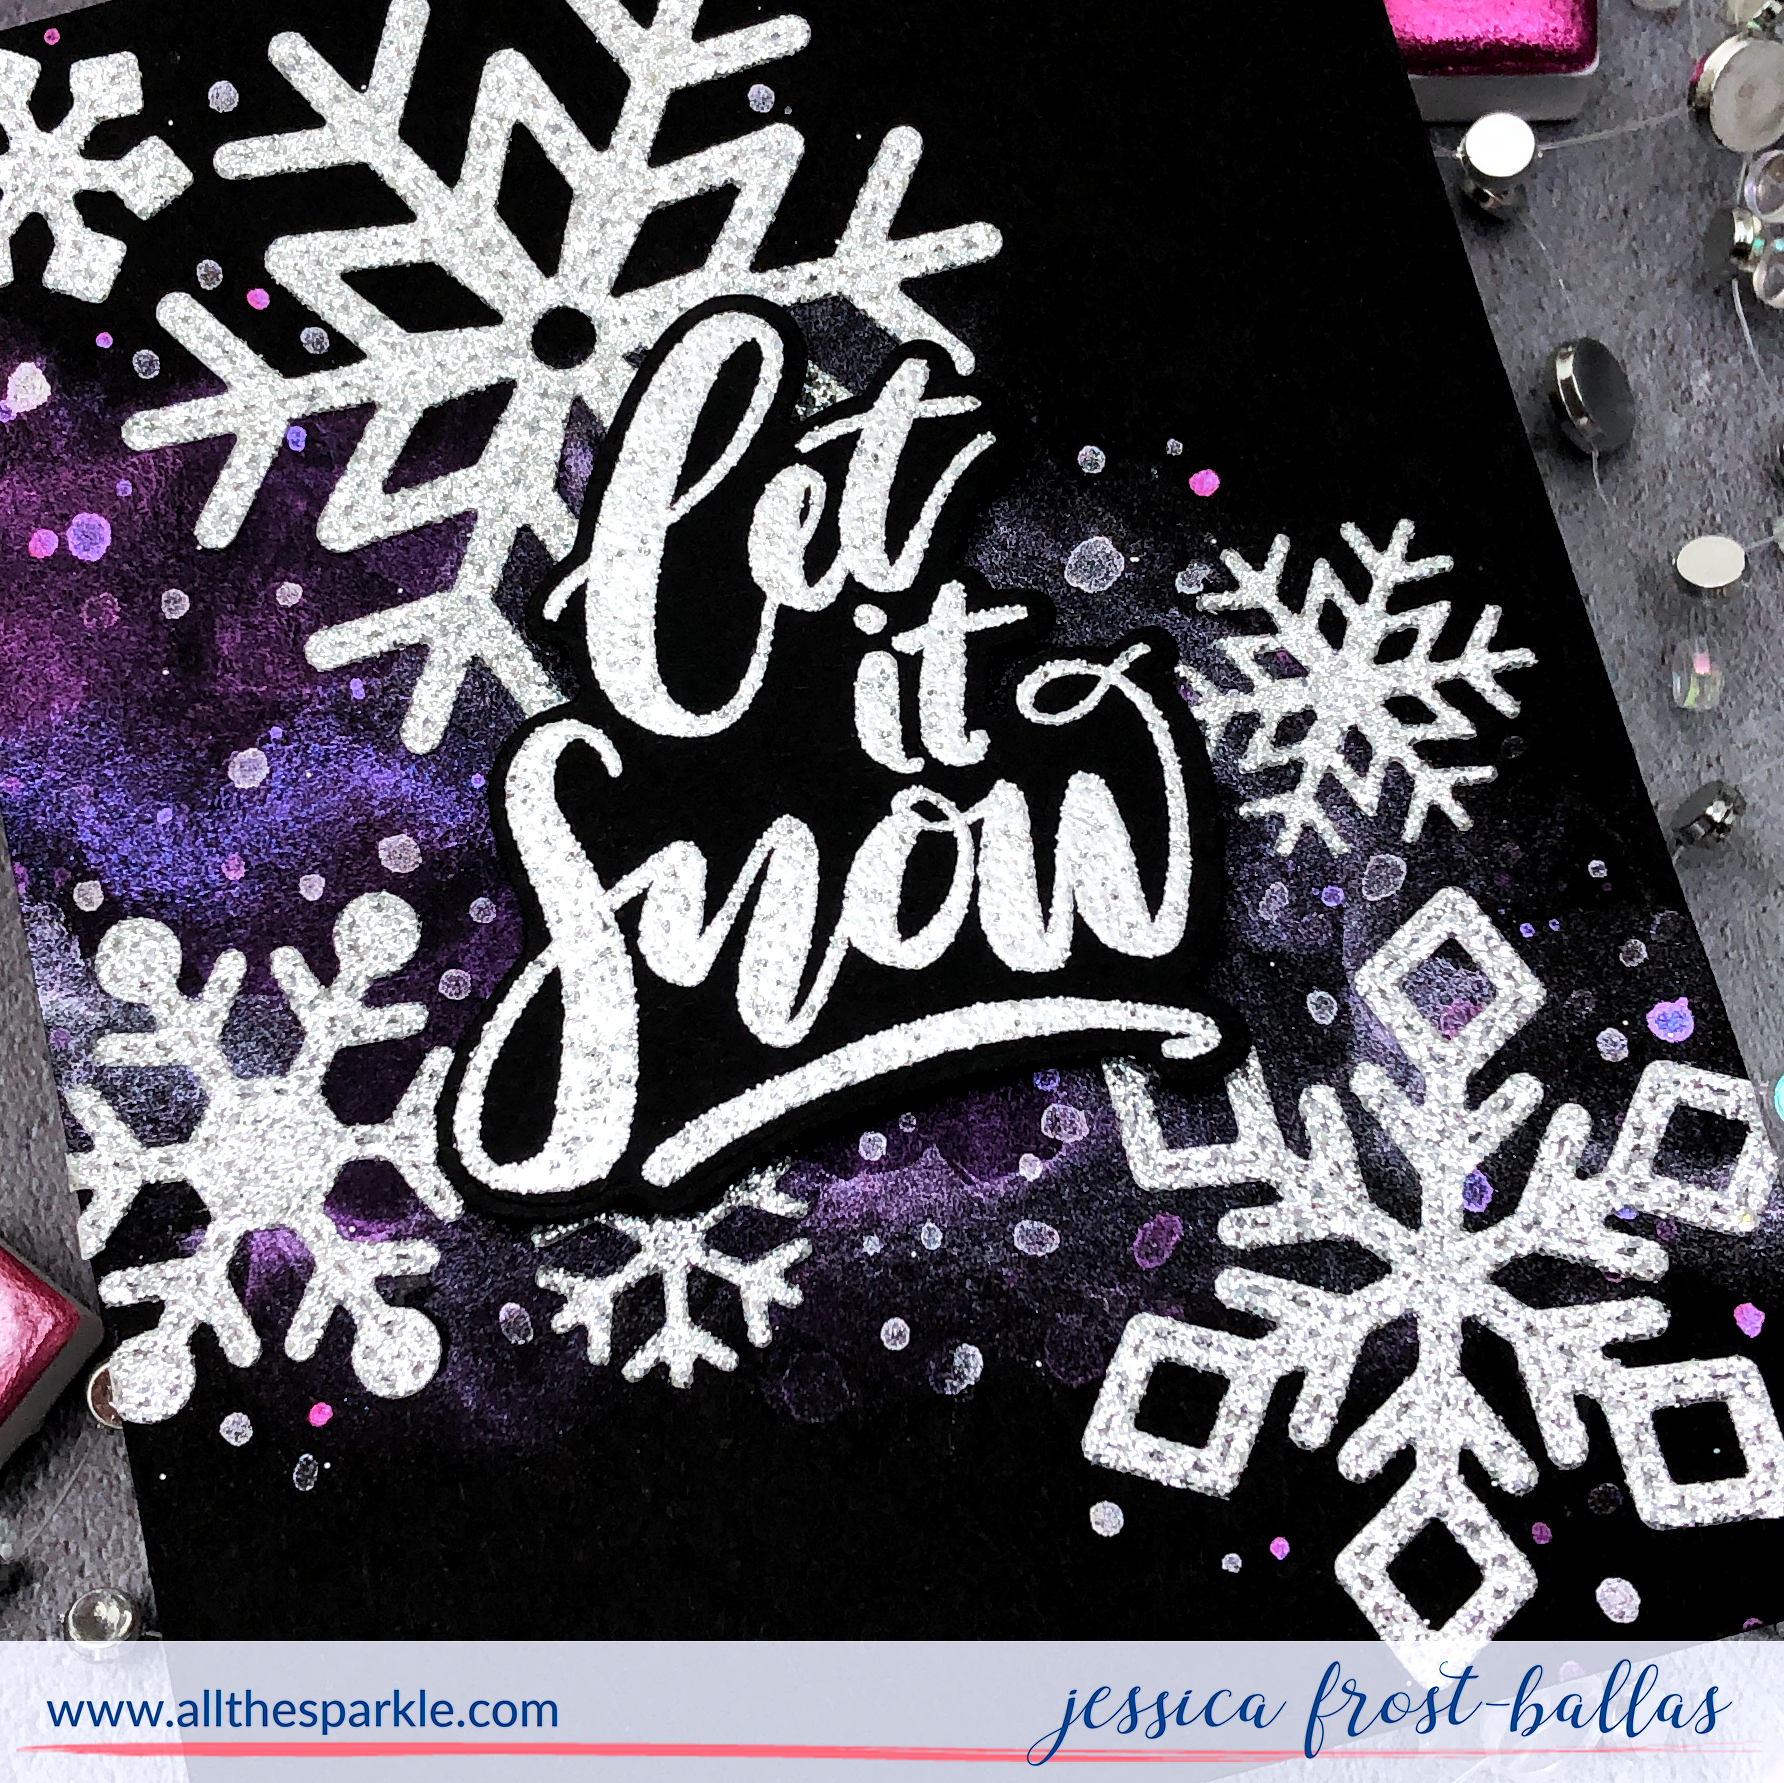 Let it Snow by Jessica Frost-Ballas